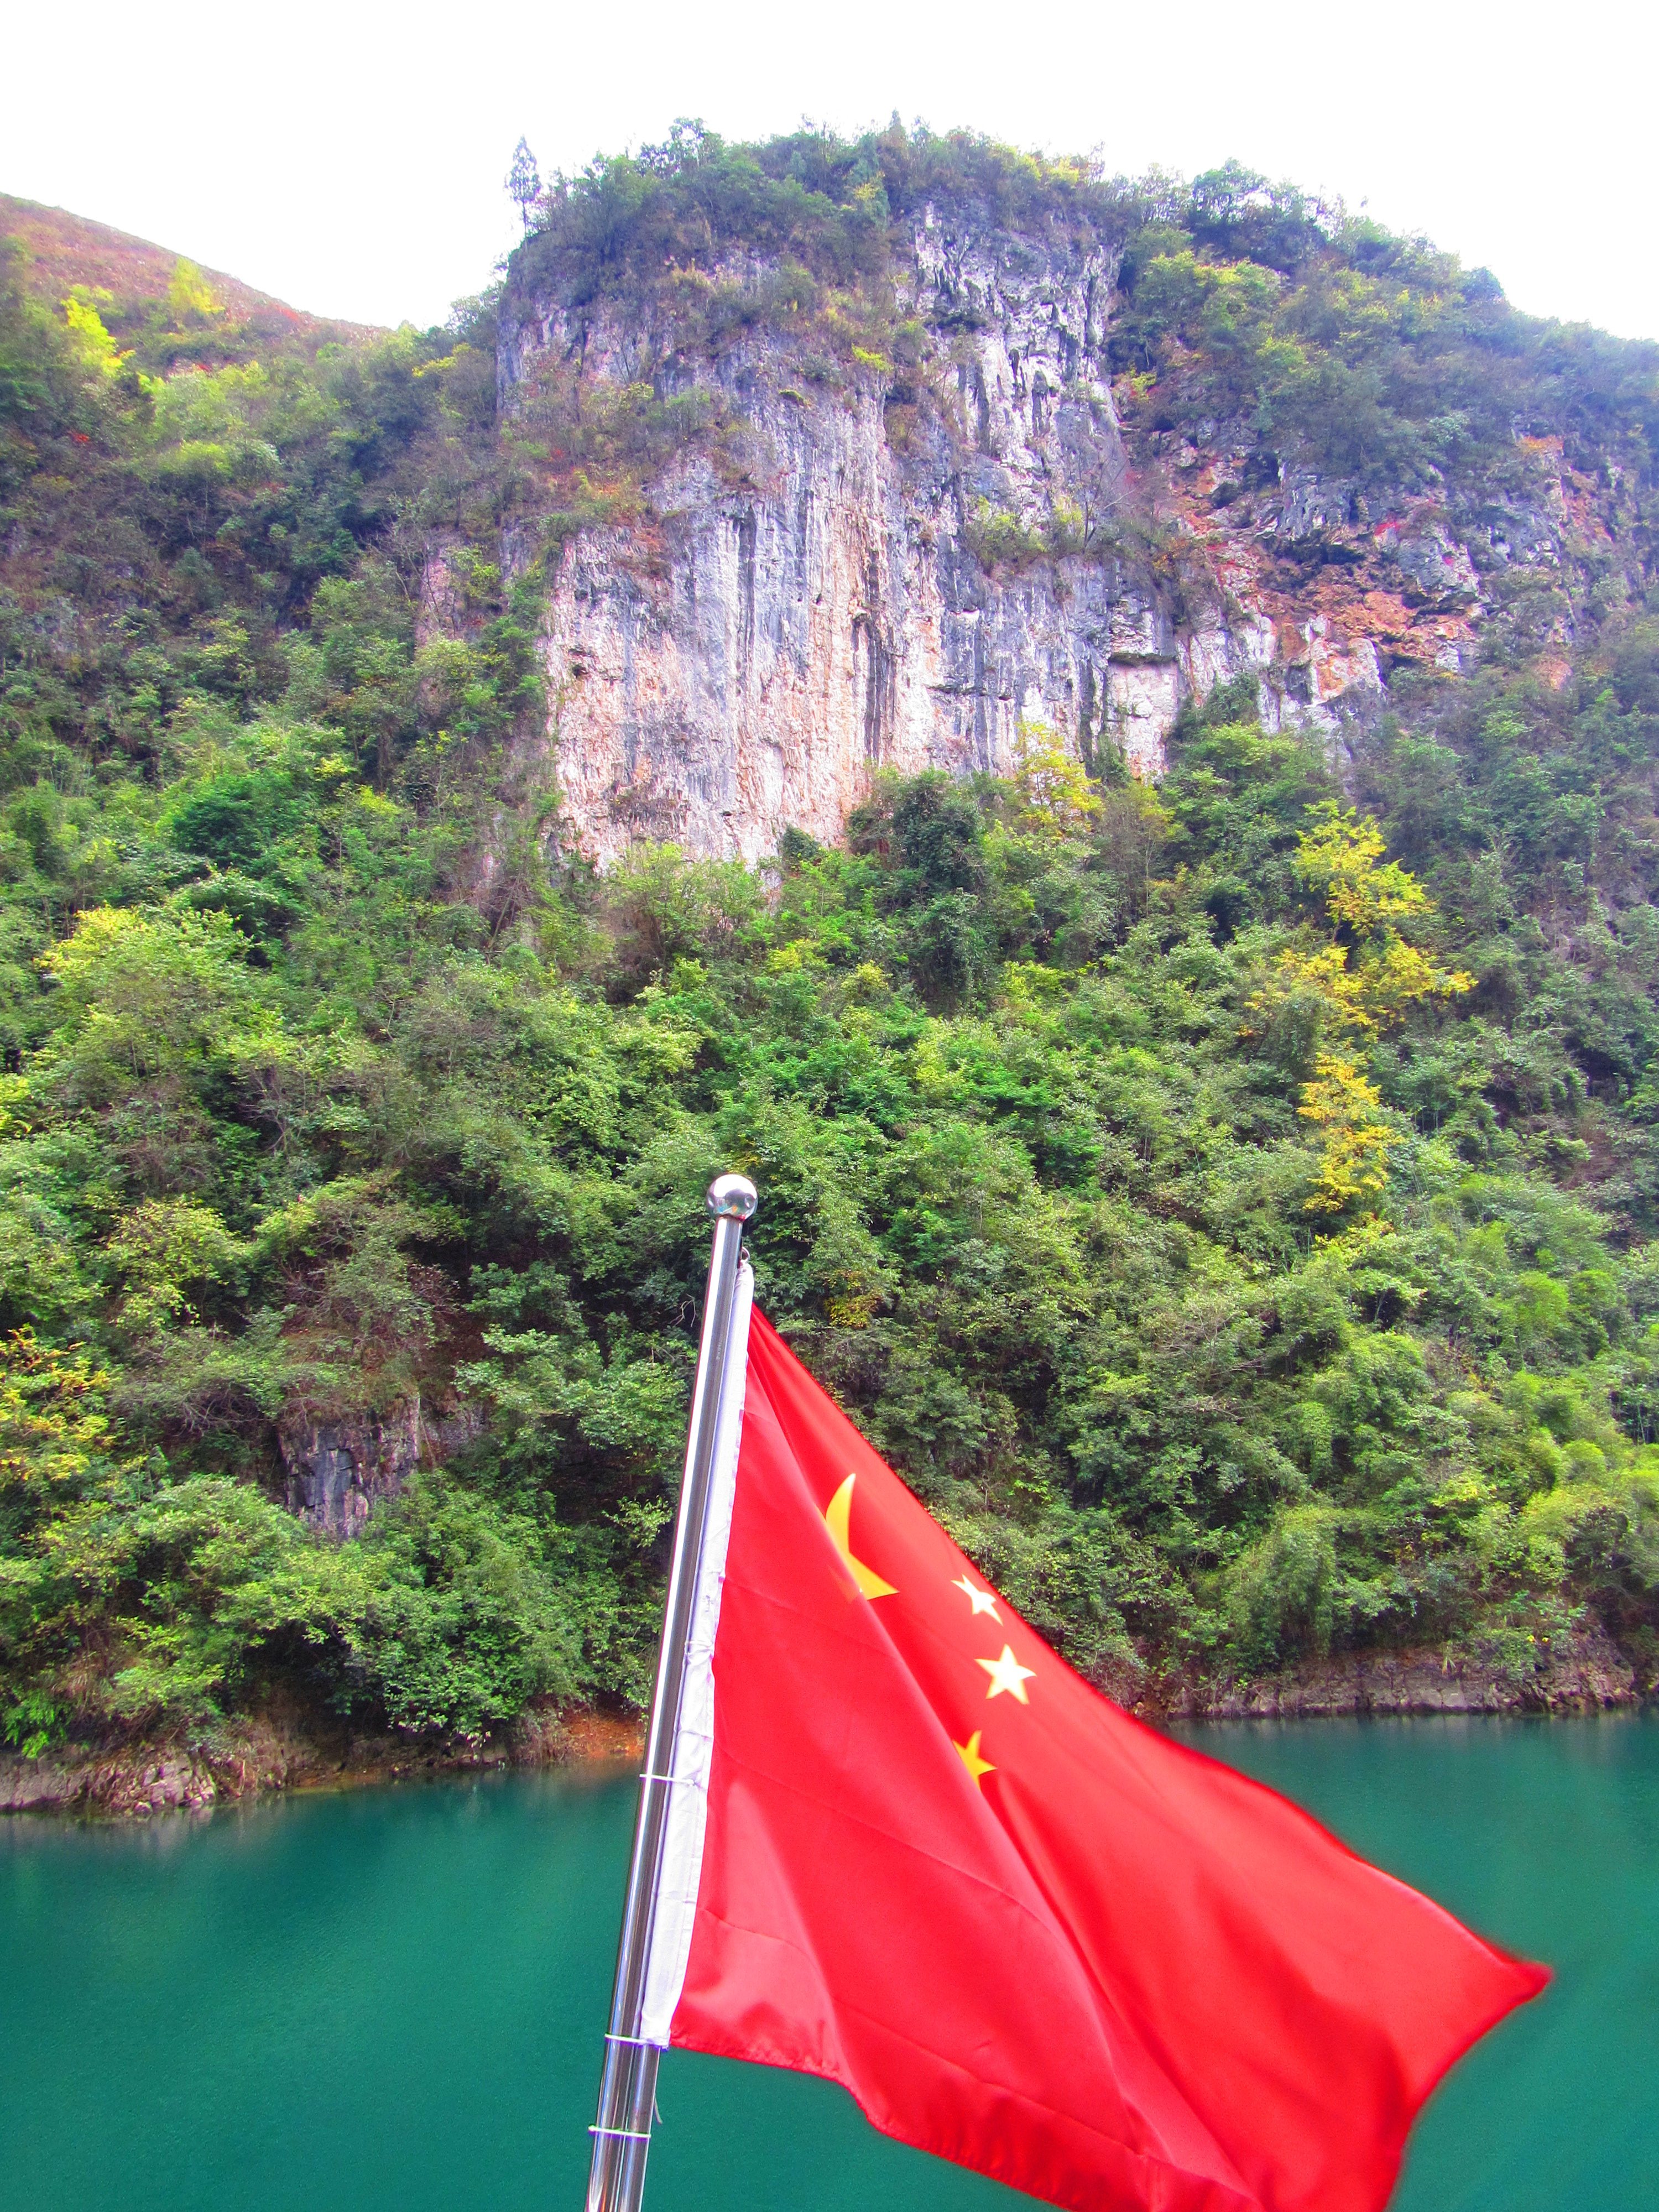 Beautiful Guizhou mountains, and our boat's flag :)